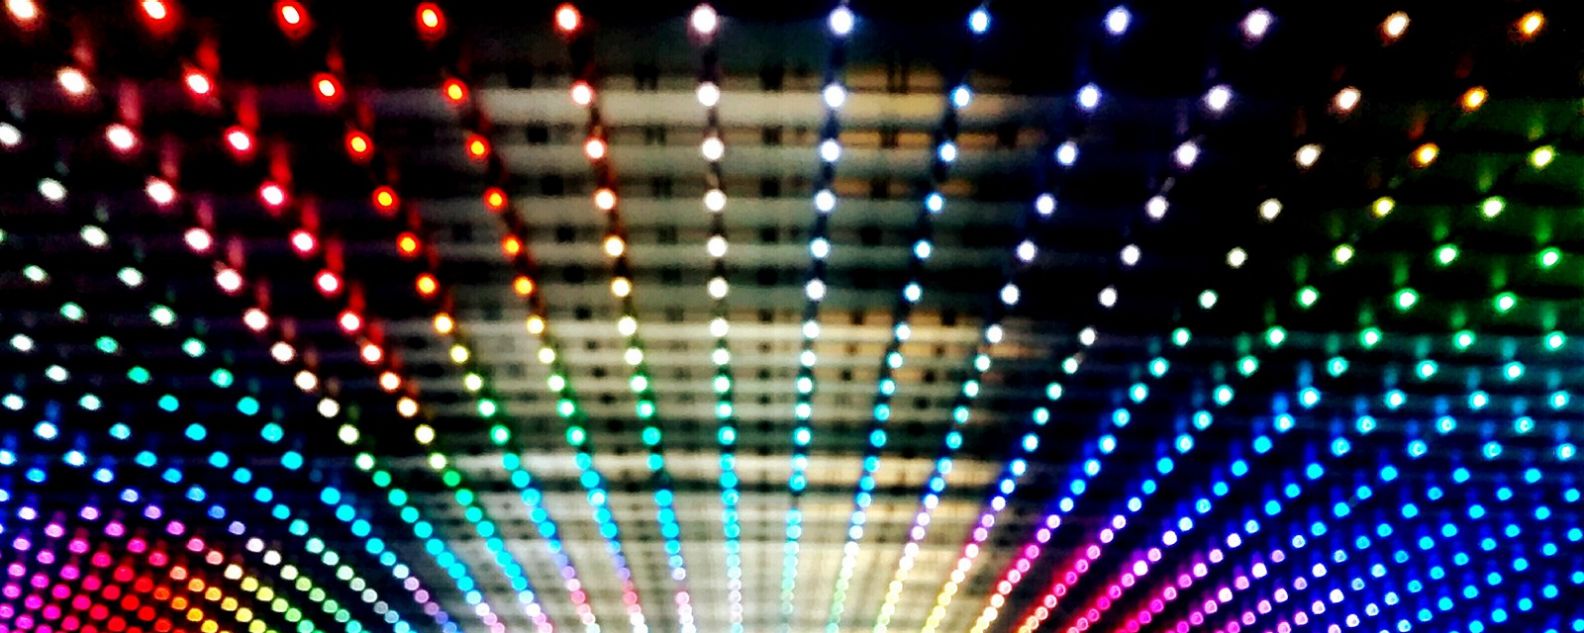 electronic abstract image of colorful lights across a ceiling